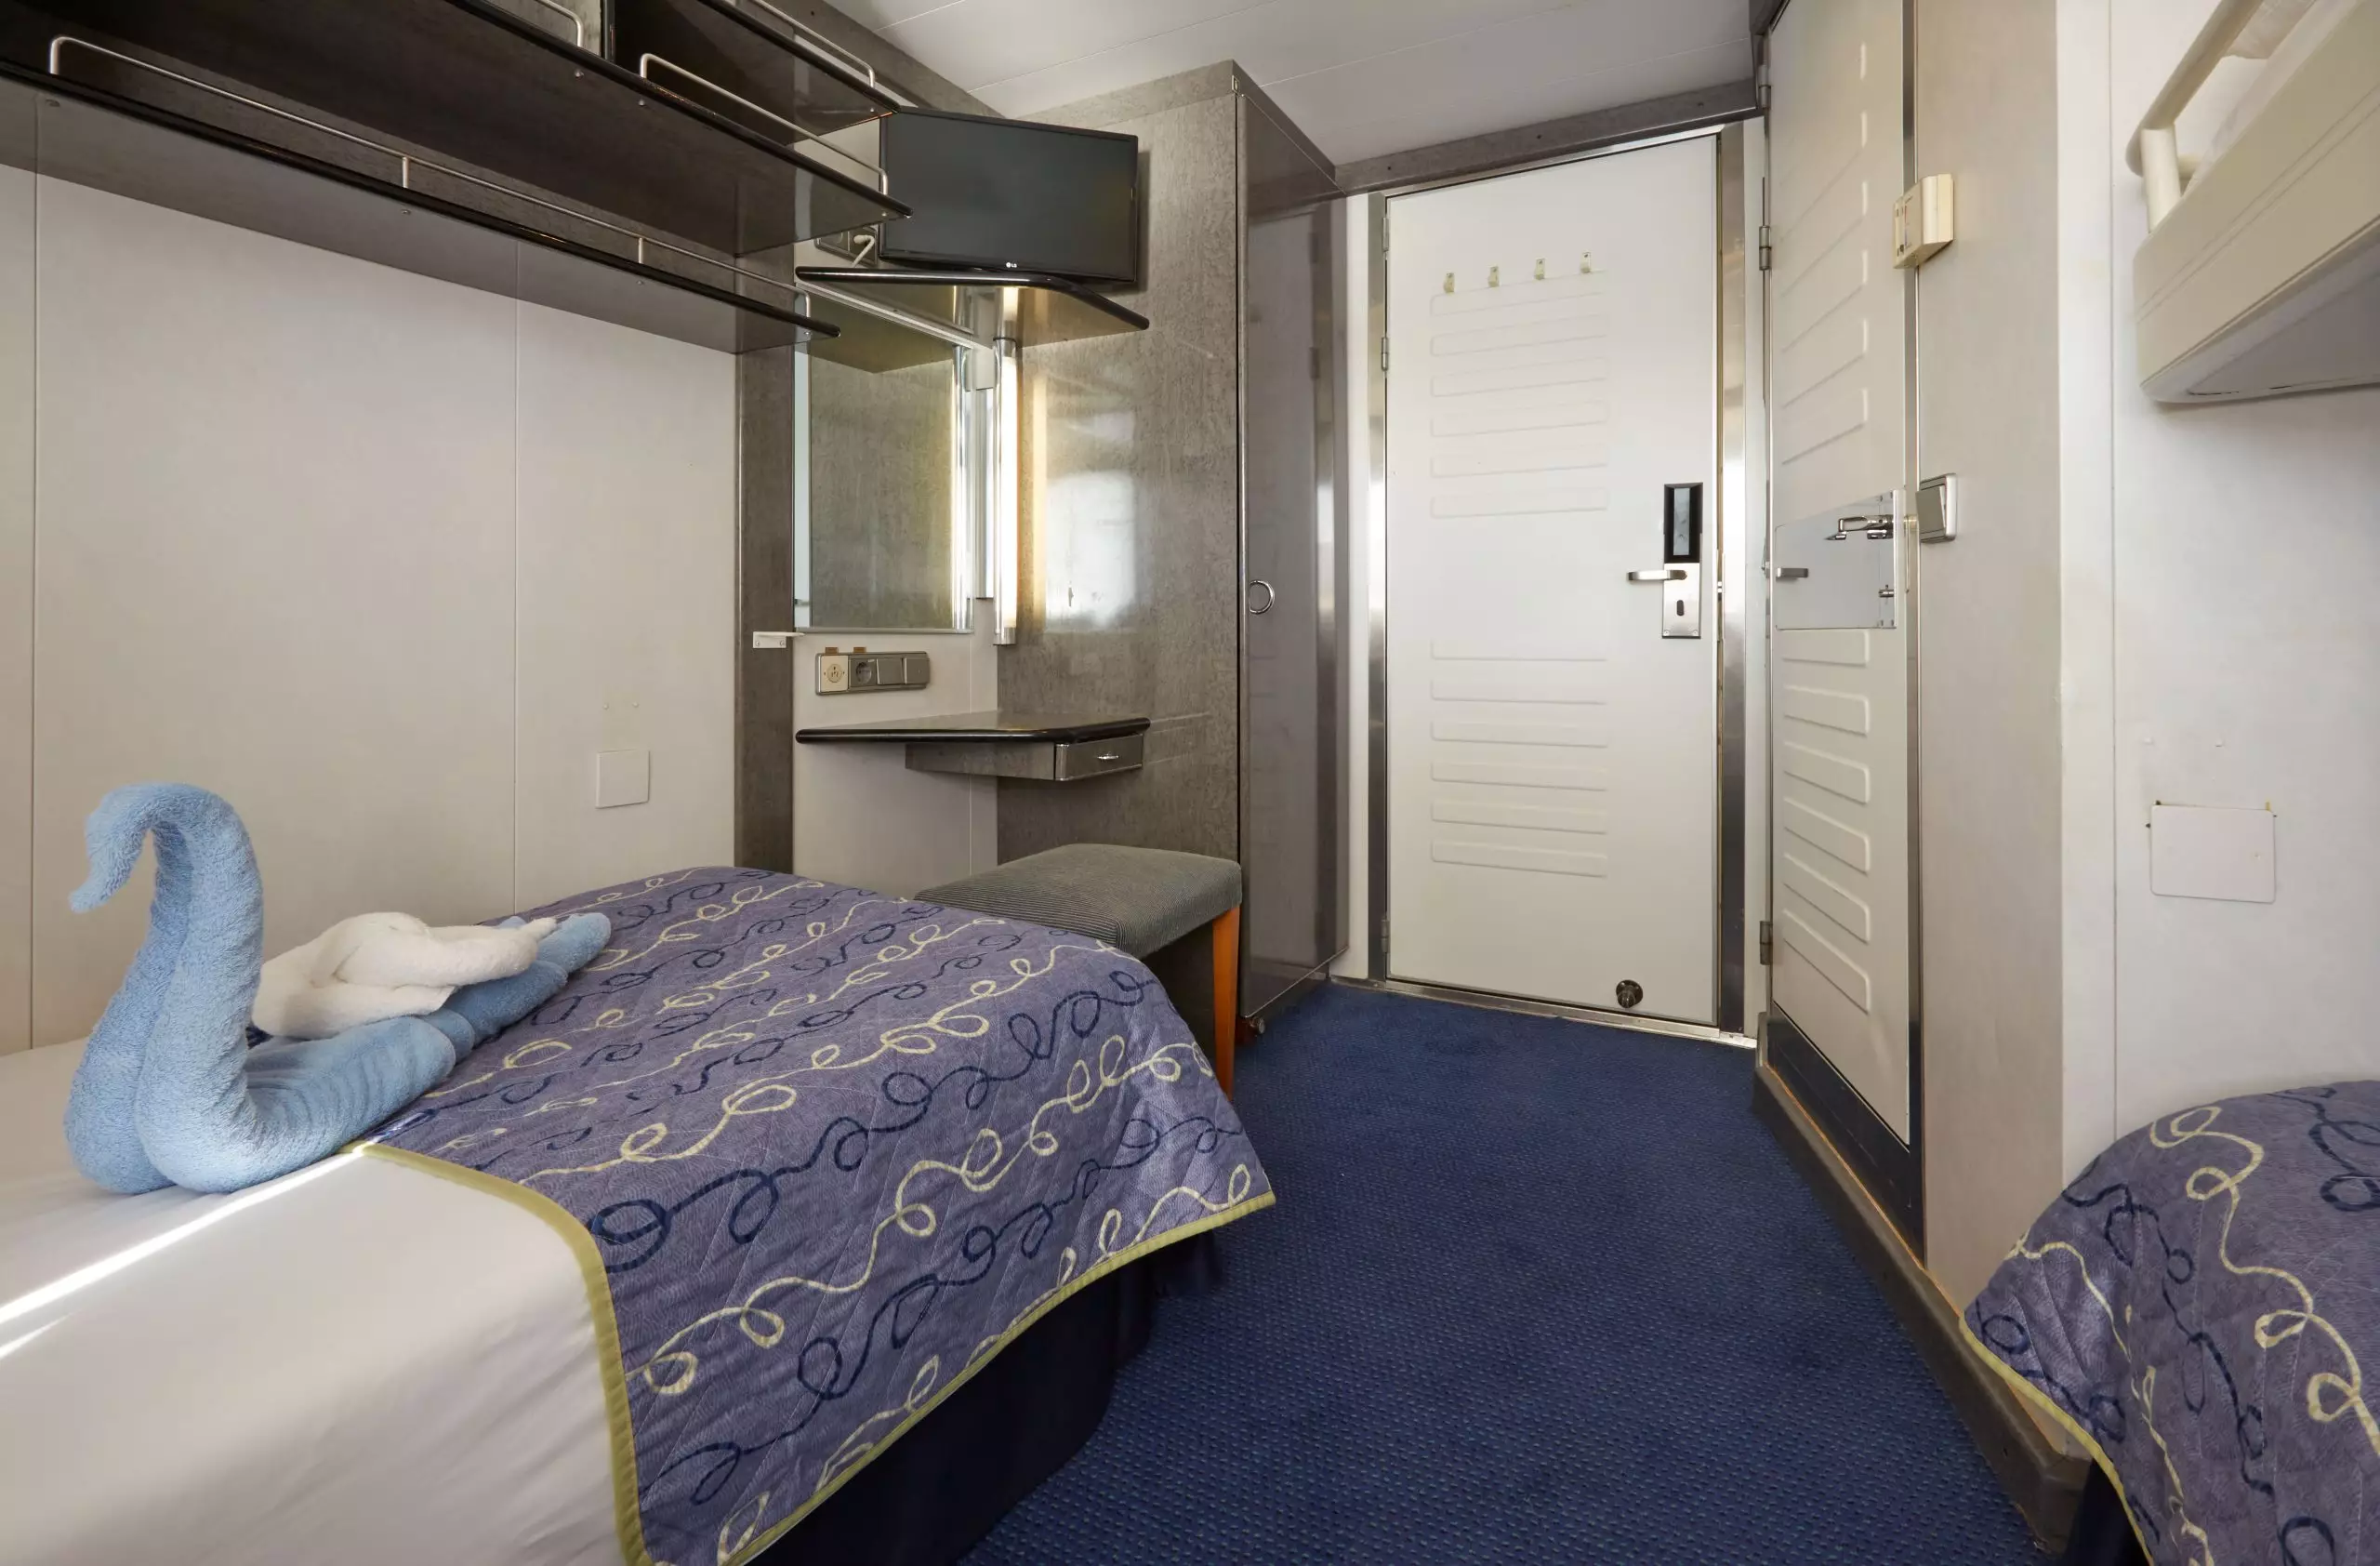 crystal-staterooms-xbo (3)